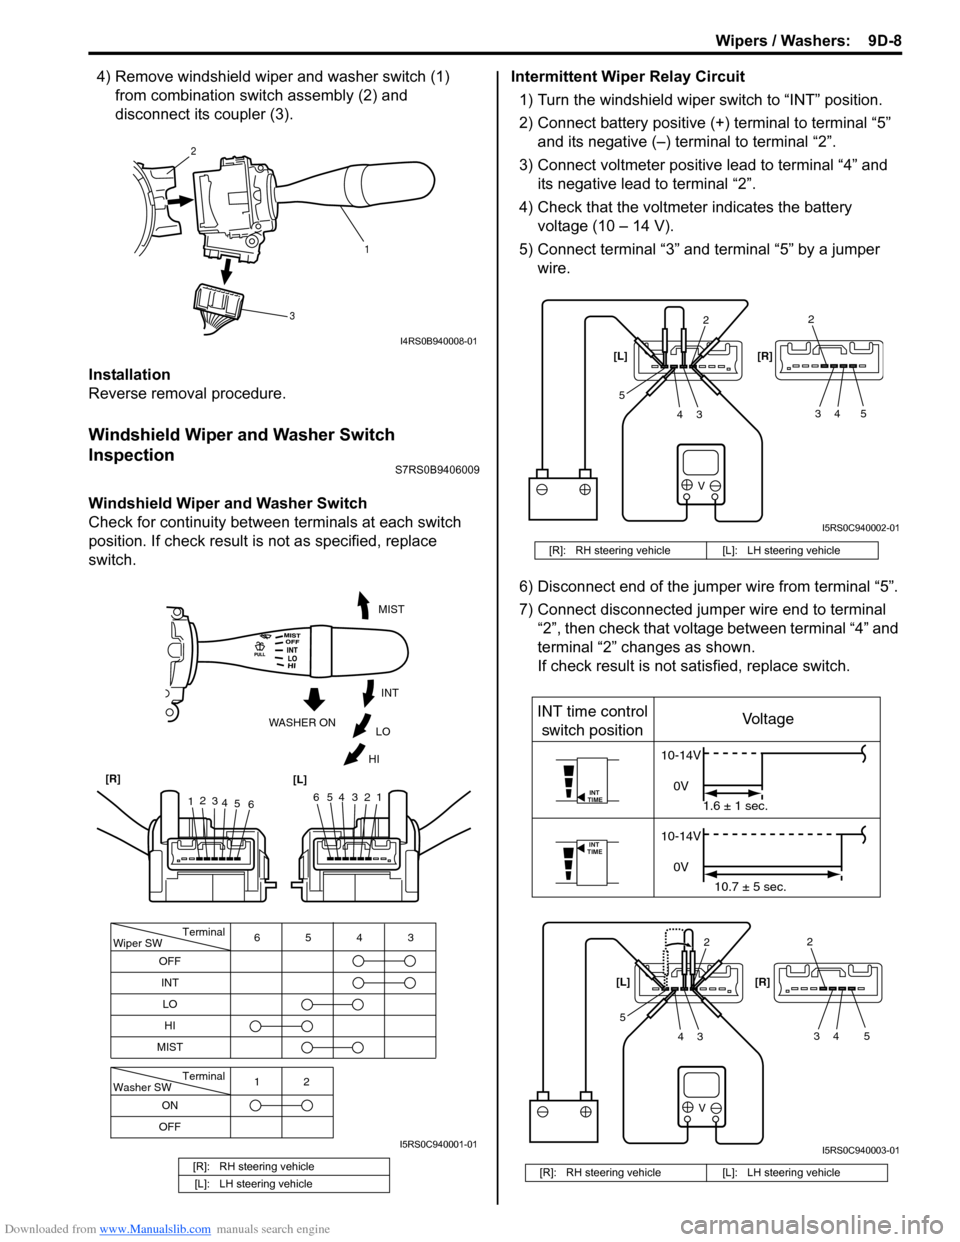 SUZUKI SWIFT 2006 2.G Service User Guide Downloaded from www.Manualslib.com manuals search engine Wipers / Washers:  9D-8
4) Remove windshield wiper and washer switch (1) from combination swit ch assembly (2) and 
disconnect its coupler (3).